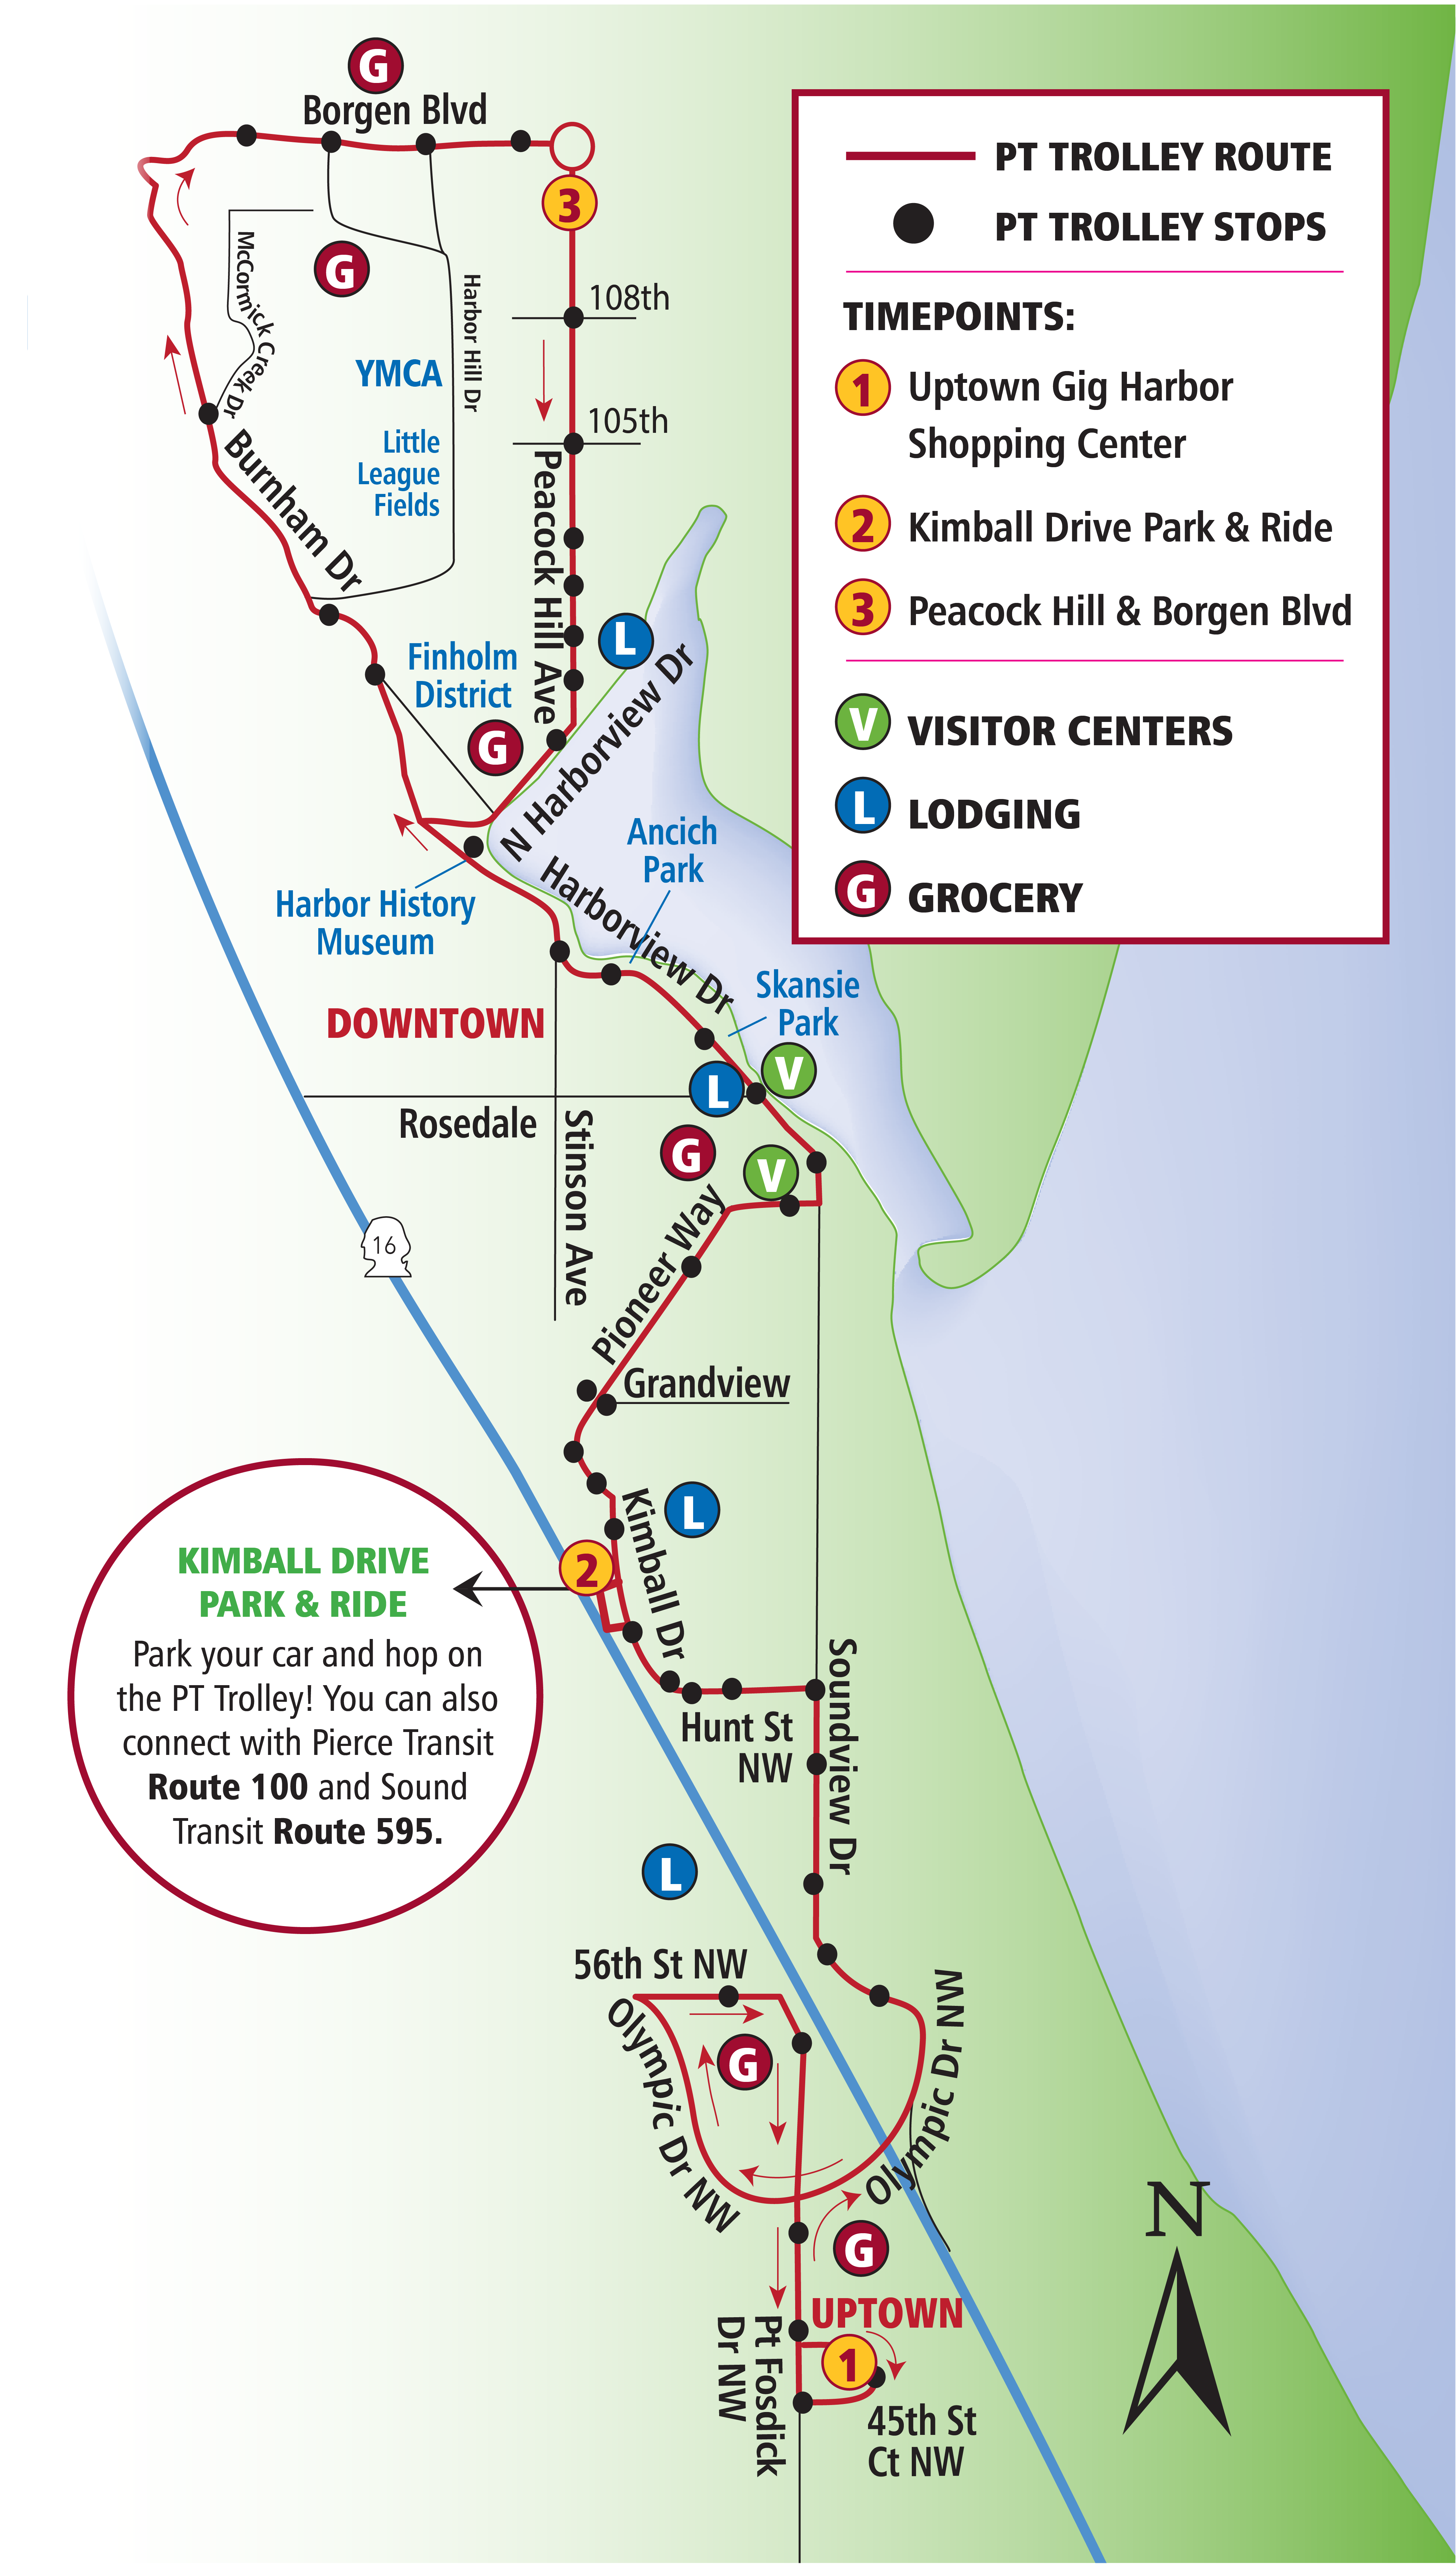 GH Trolley Schedules & Map-04